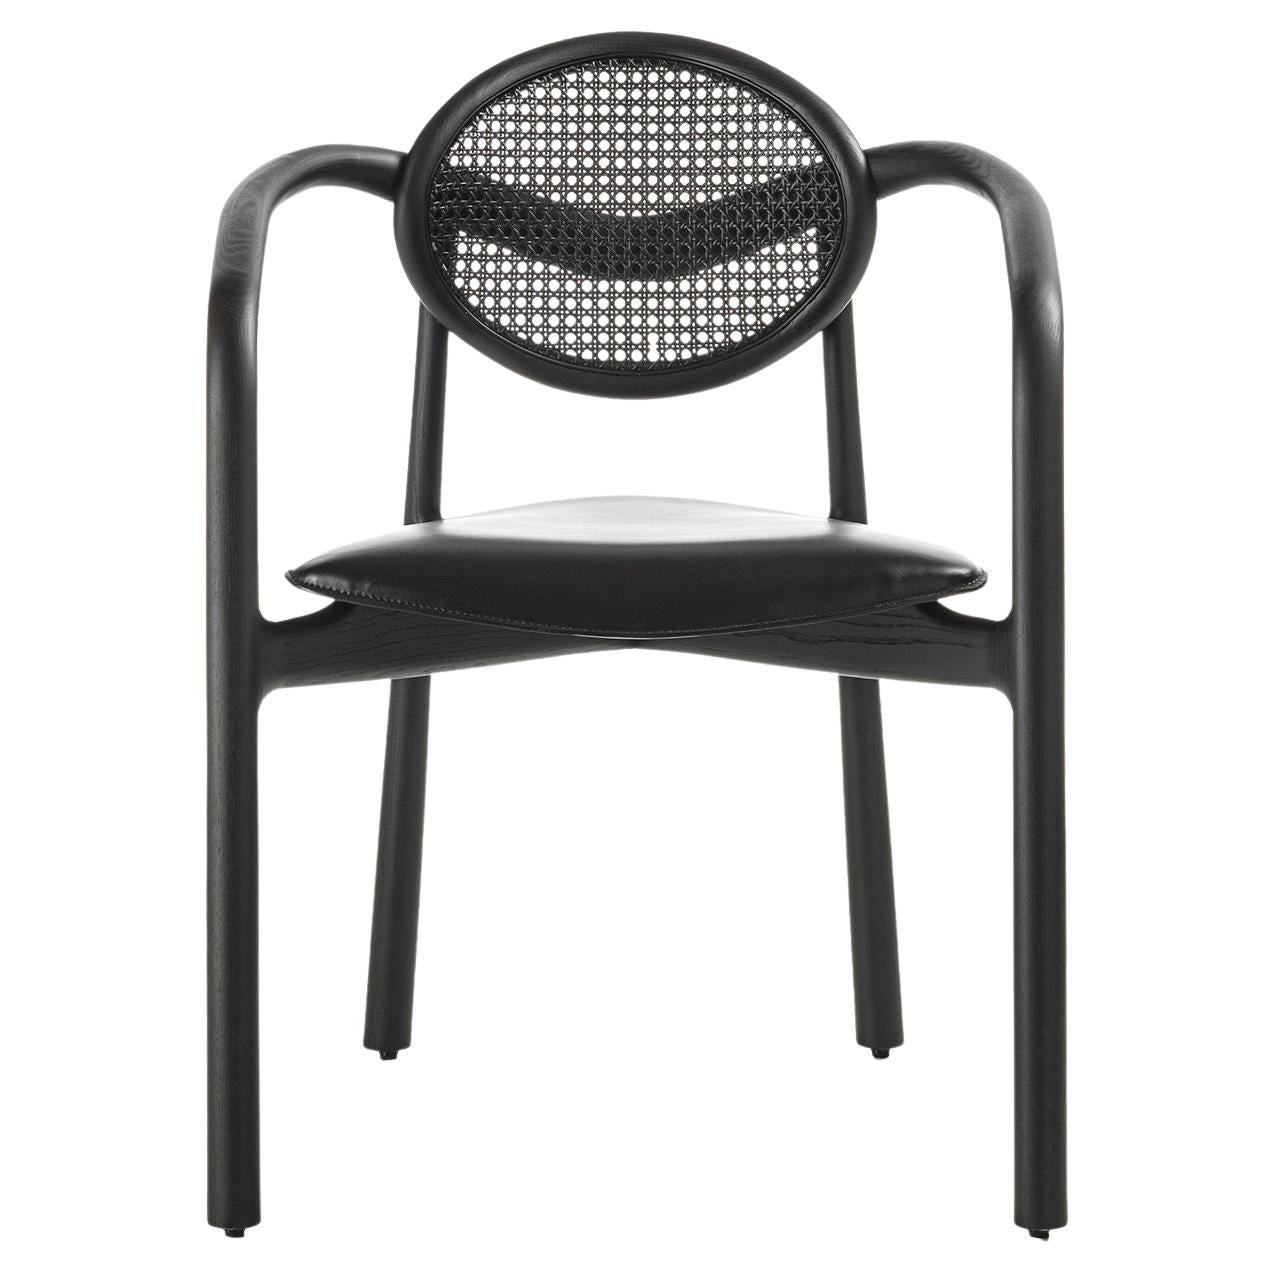 Marlena Black Chair with Arms by Studio Nove.3